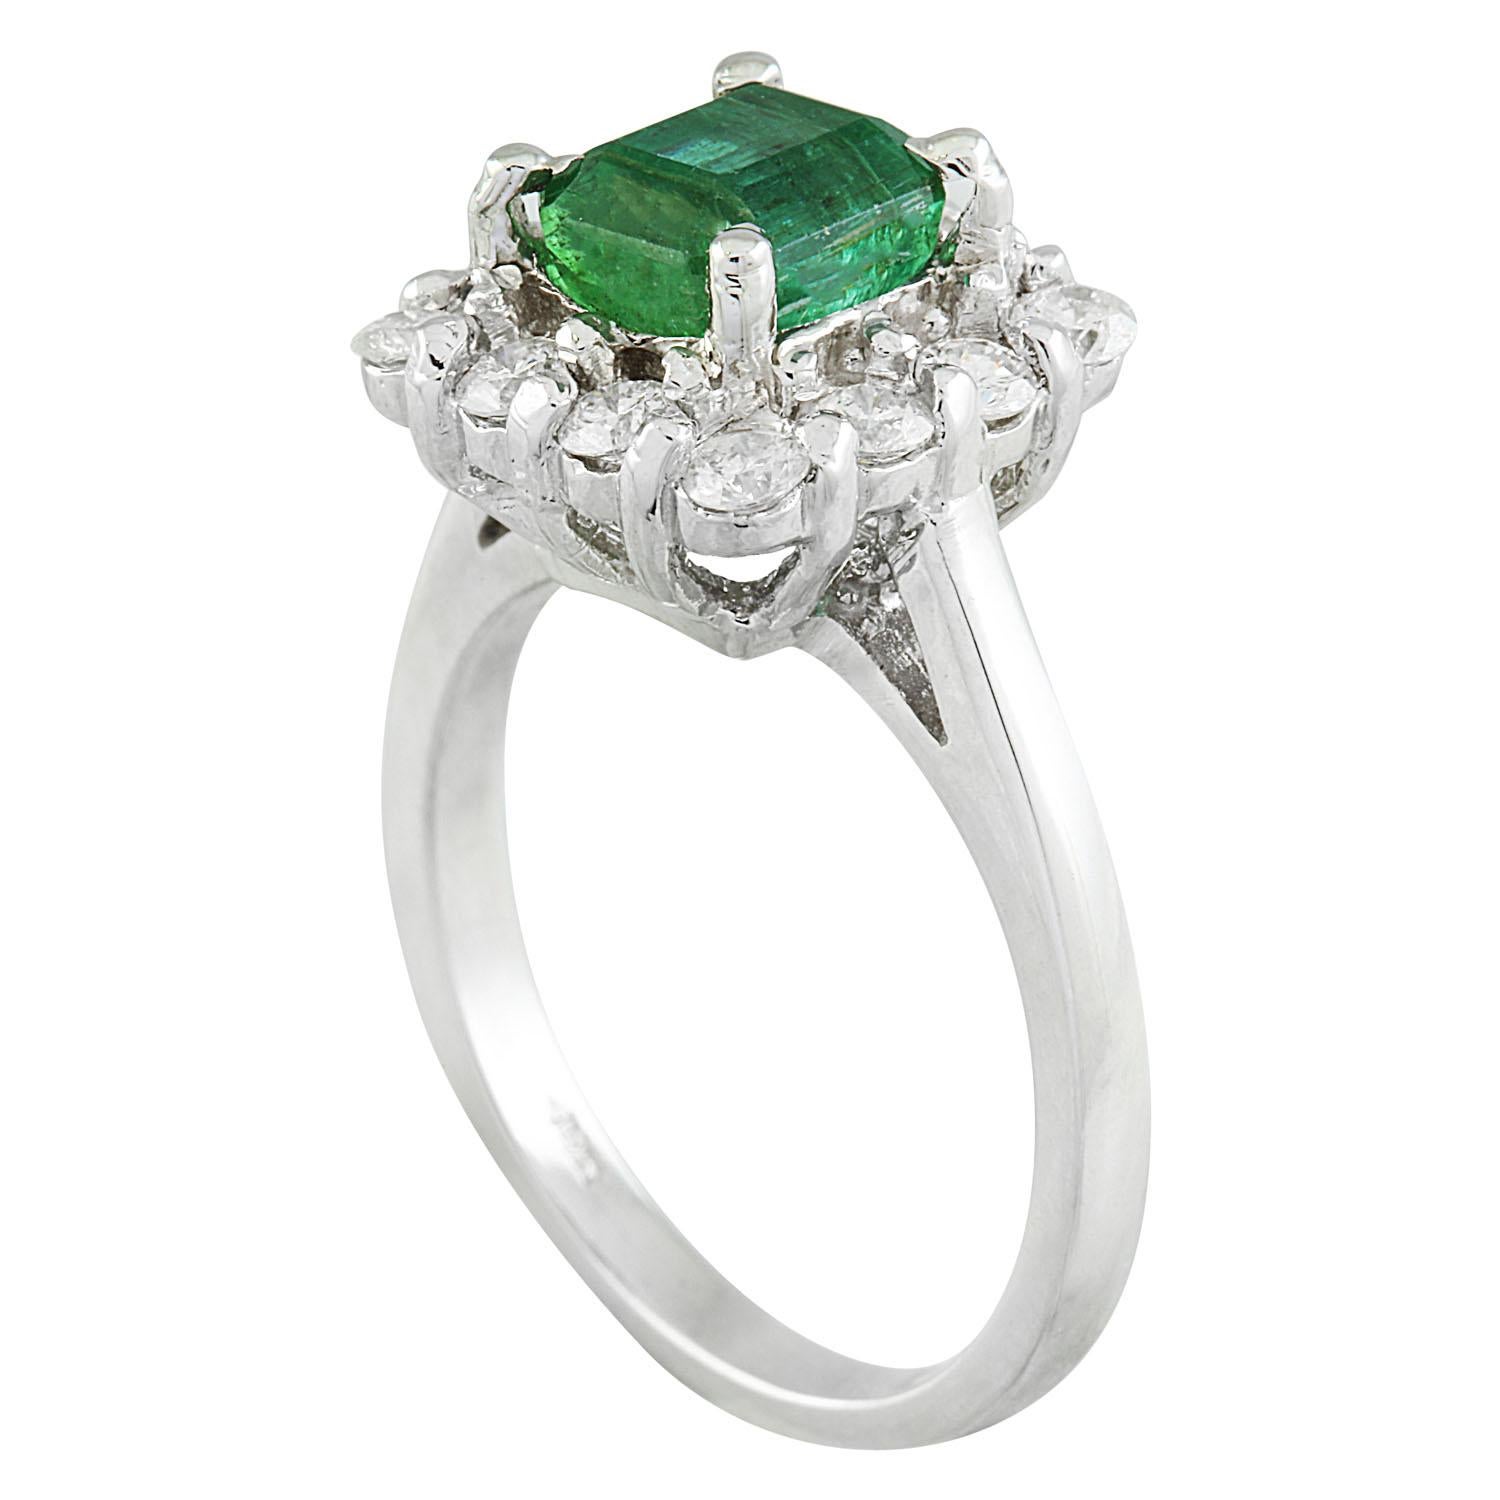 2.60 Carat Natural Emerald 14 Karat Solid White Gold Diamond Ring
Stamped: 14K 
Total Ring Weight: 6.7 Grams 
Emerald Weight 1.90 Carat (7.00x7.00 Millimeters)
Diamond Weight: 0.70 carat (F-G Color, VS2-SI1 Clarity )
Quantity: 12
Face Measures: